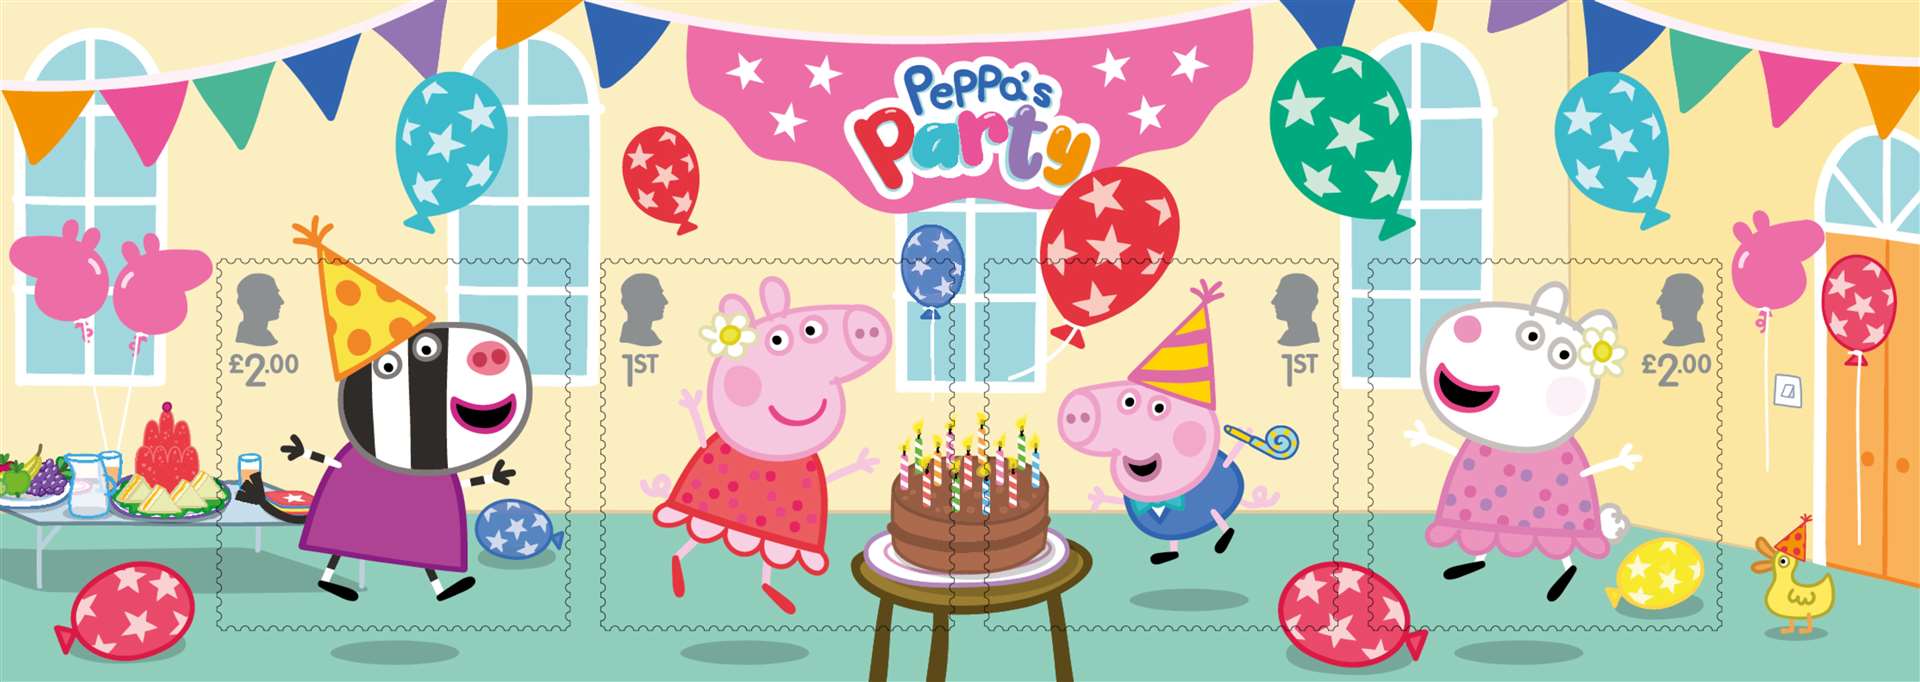 Peppa Pig celebrates 20th birthday with her own Royal Mail stamp